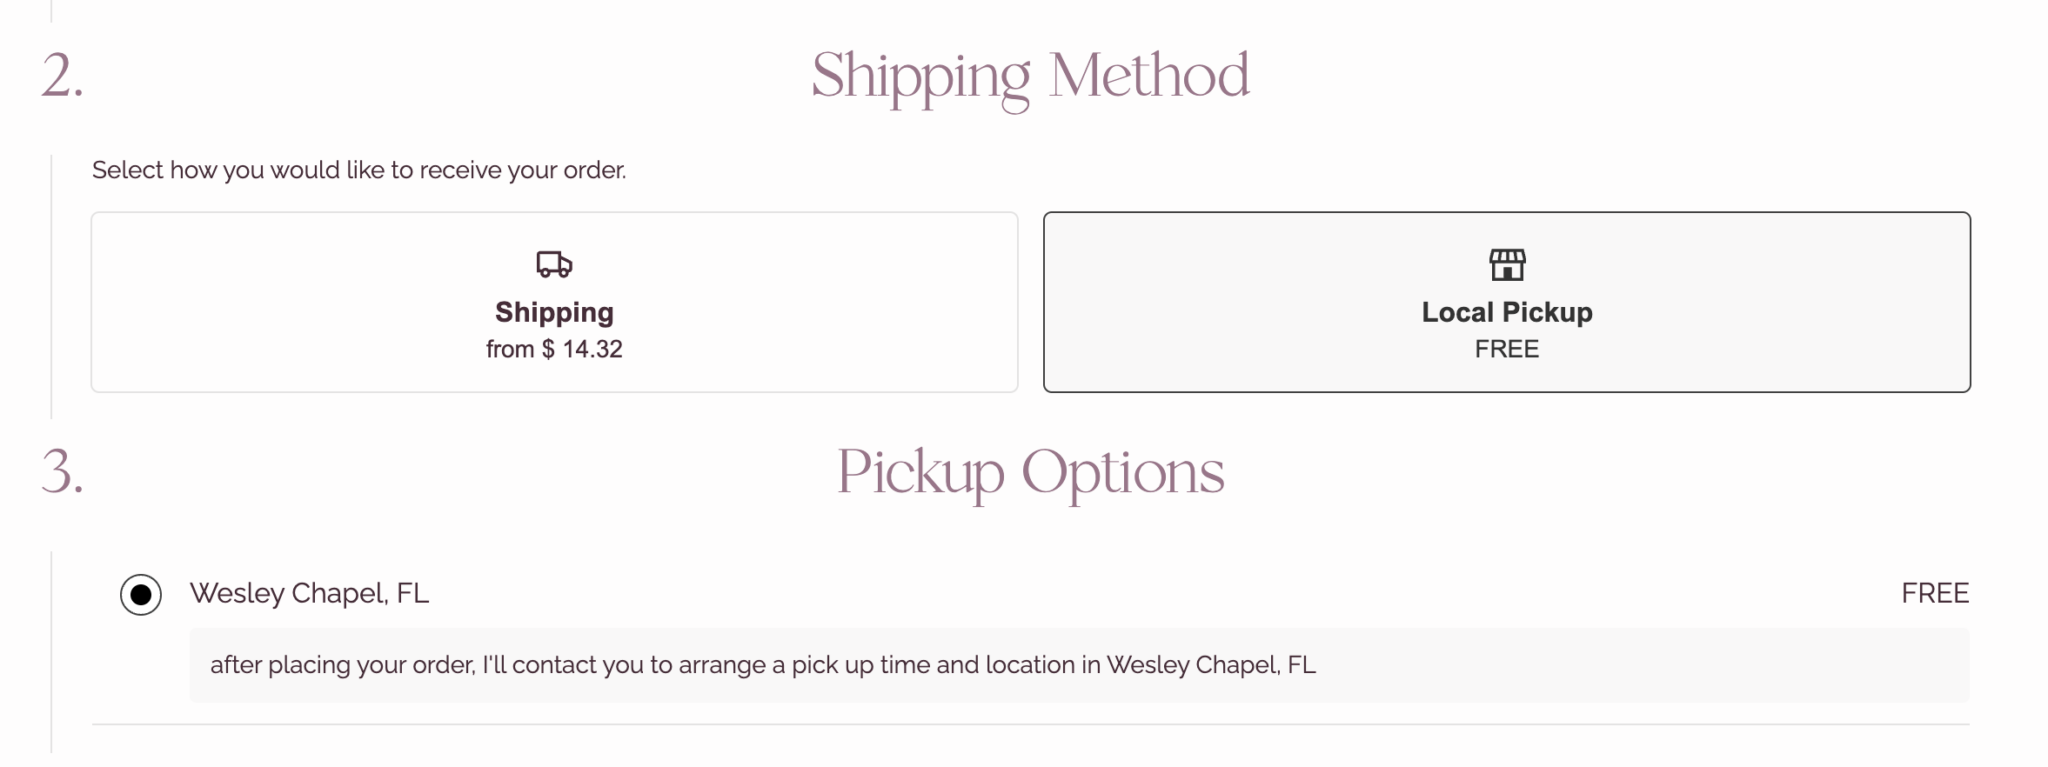 How do I know which Shipping Option is best? Sugar Flowers by Kelsie Cakes